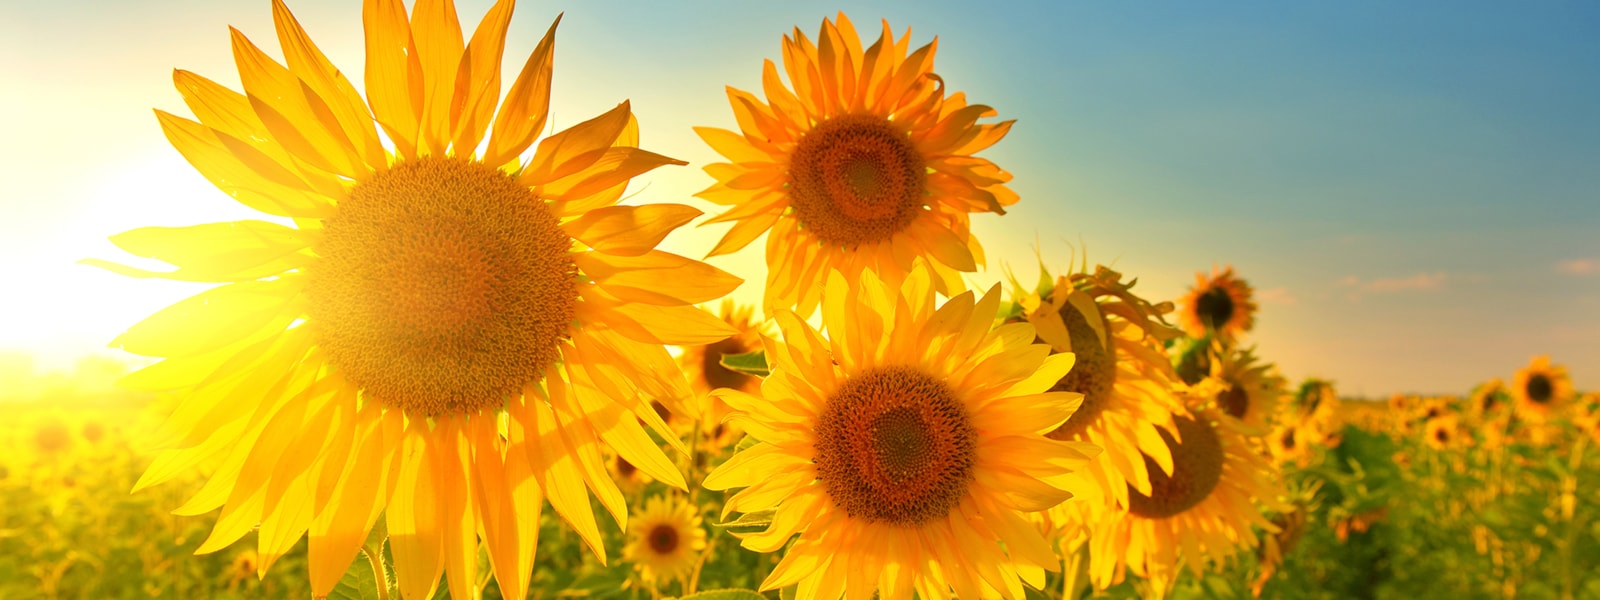 field of sunflowers with the sun shinning bright 